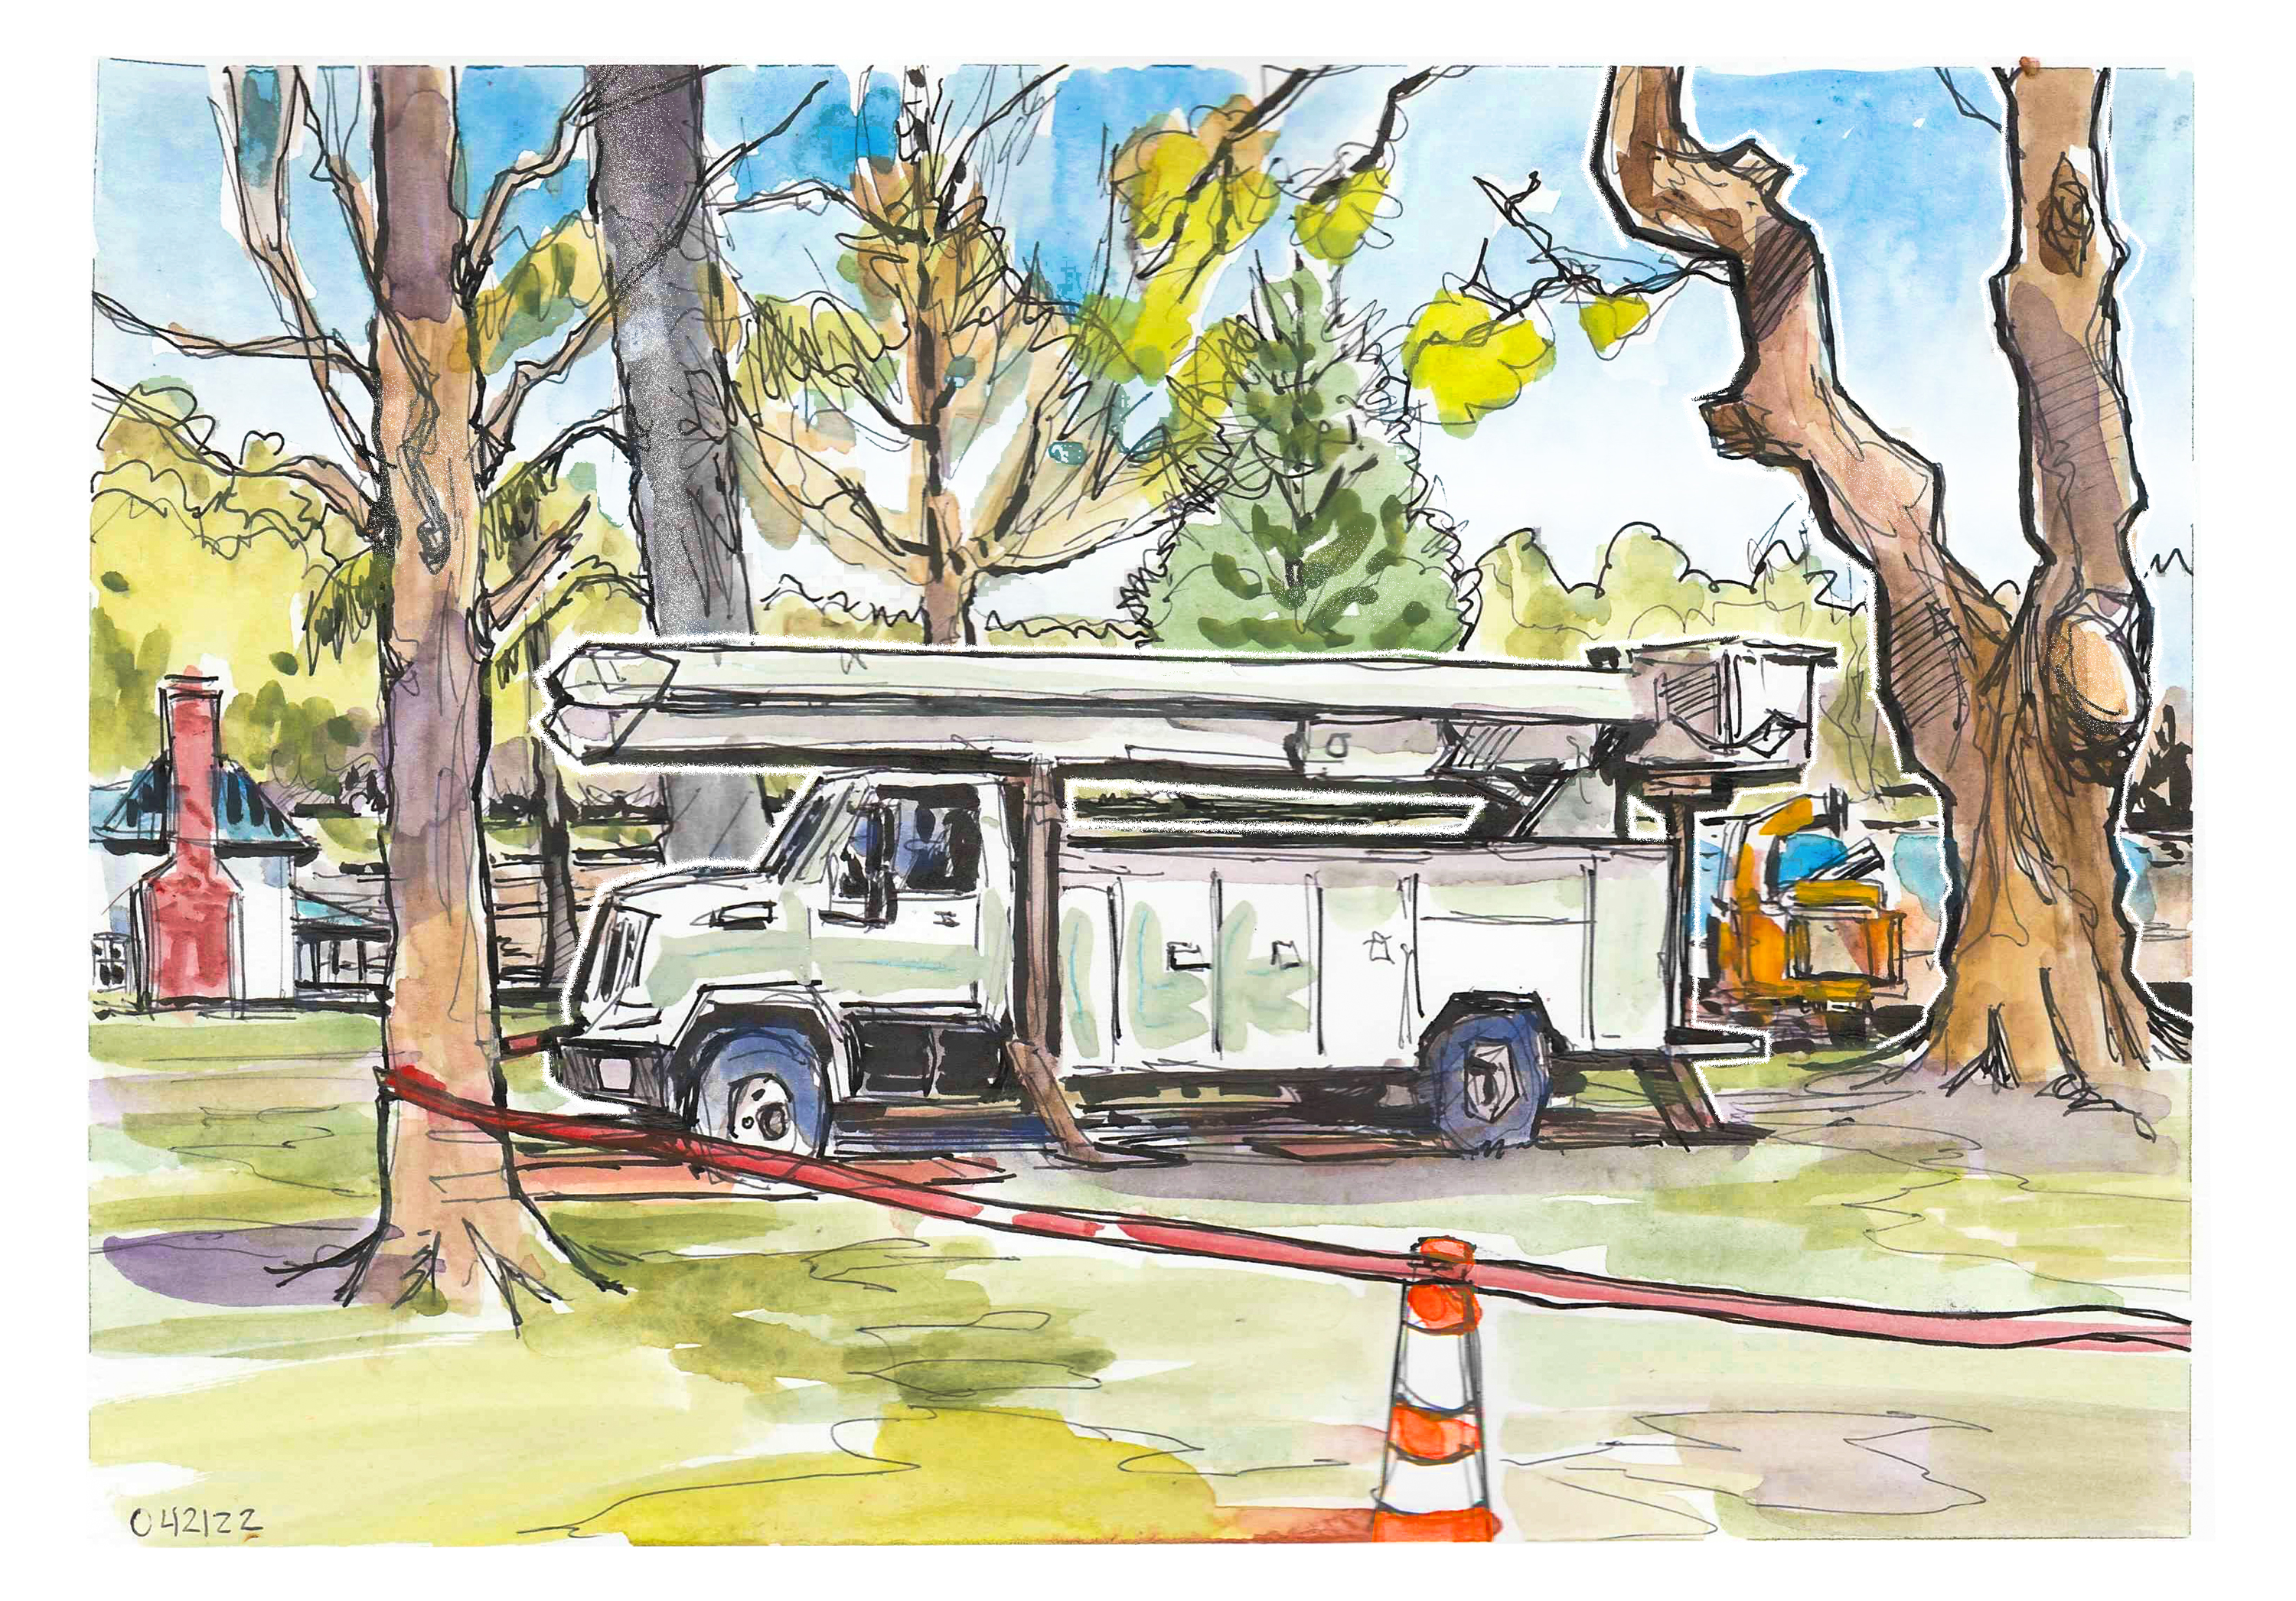 Ink and gouache sketch of a buckettruck and Solitude and a tree with the limbs being removed